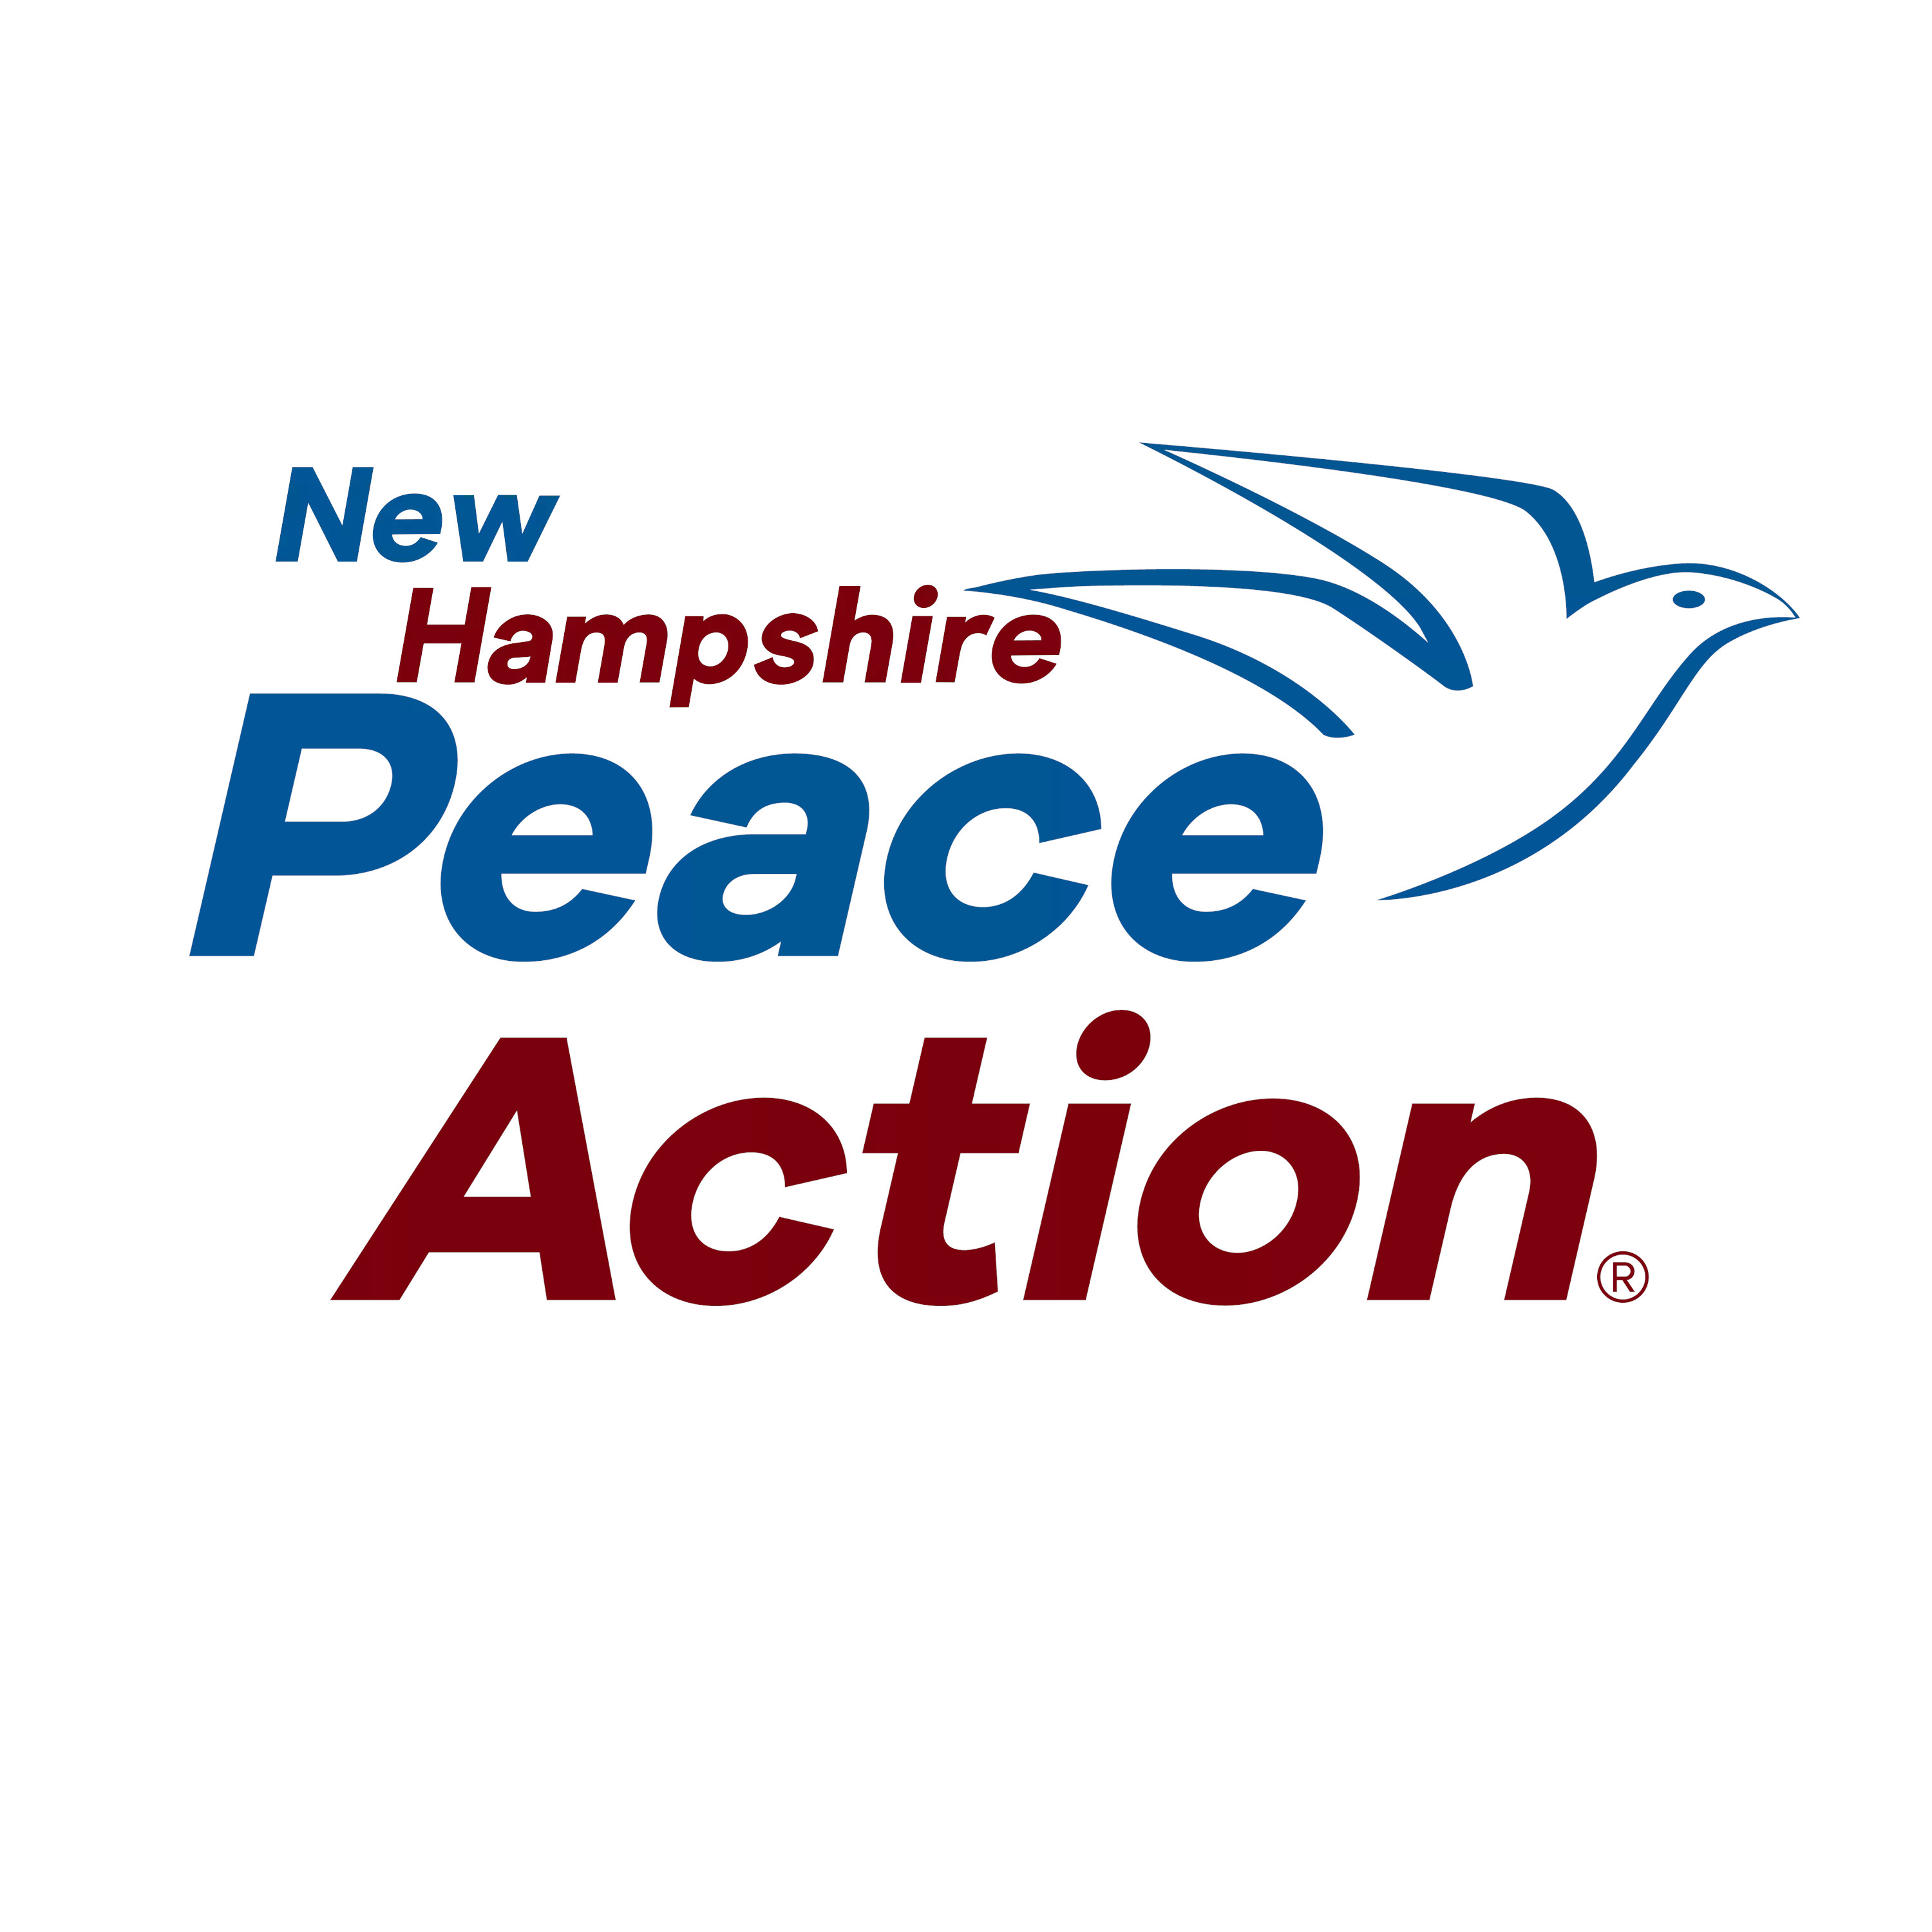 New Hampshire Peace Action